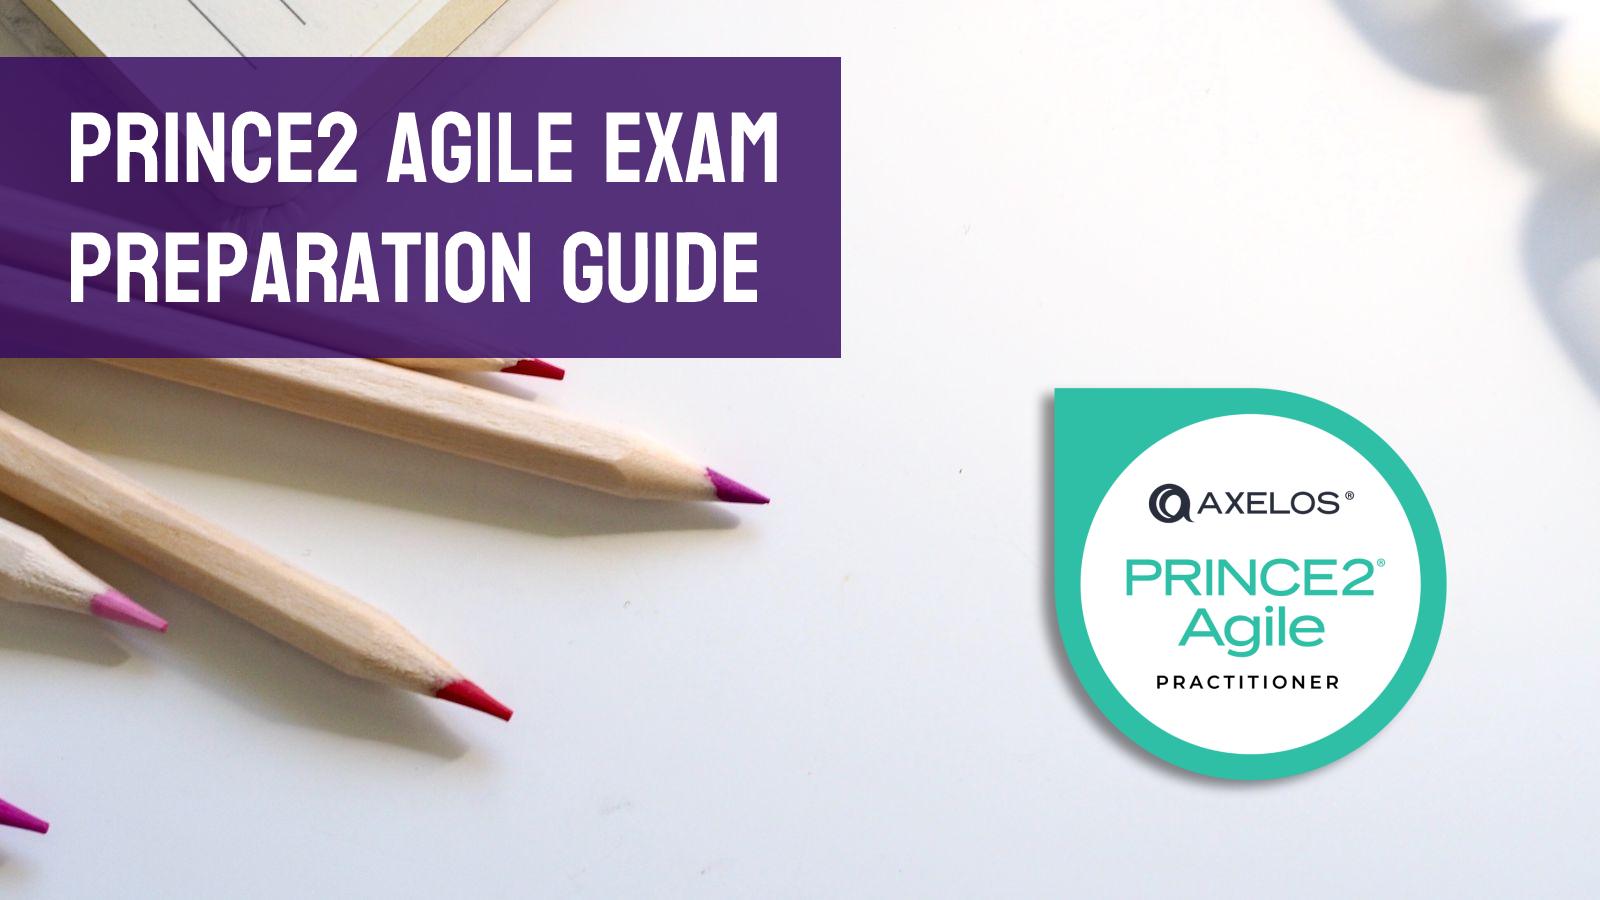 PRINCE2 Agile is a project management certification by Axelos. What is it about, and should you get it?